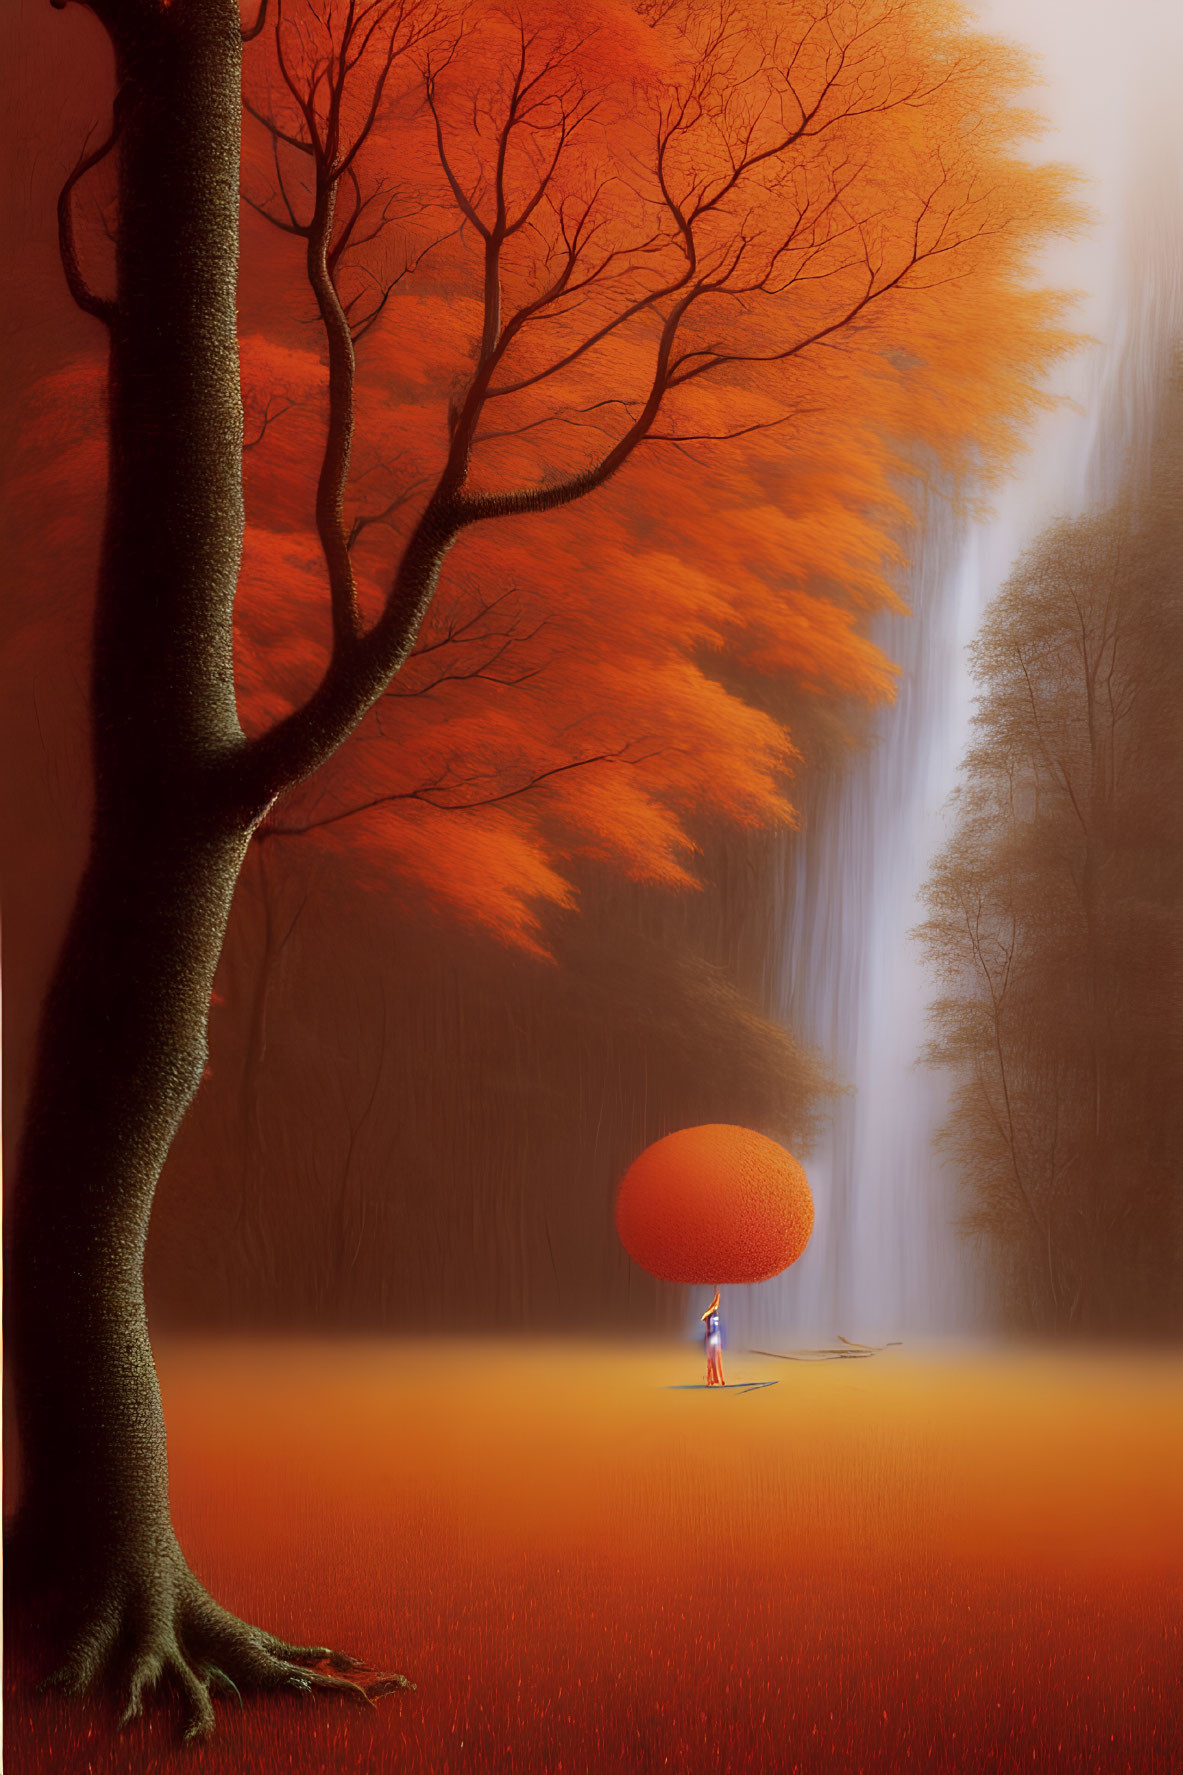 Person with Orange Umbrella in Fiery Autumn Scene by Waterfall